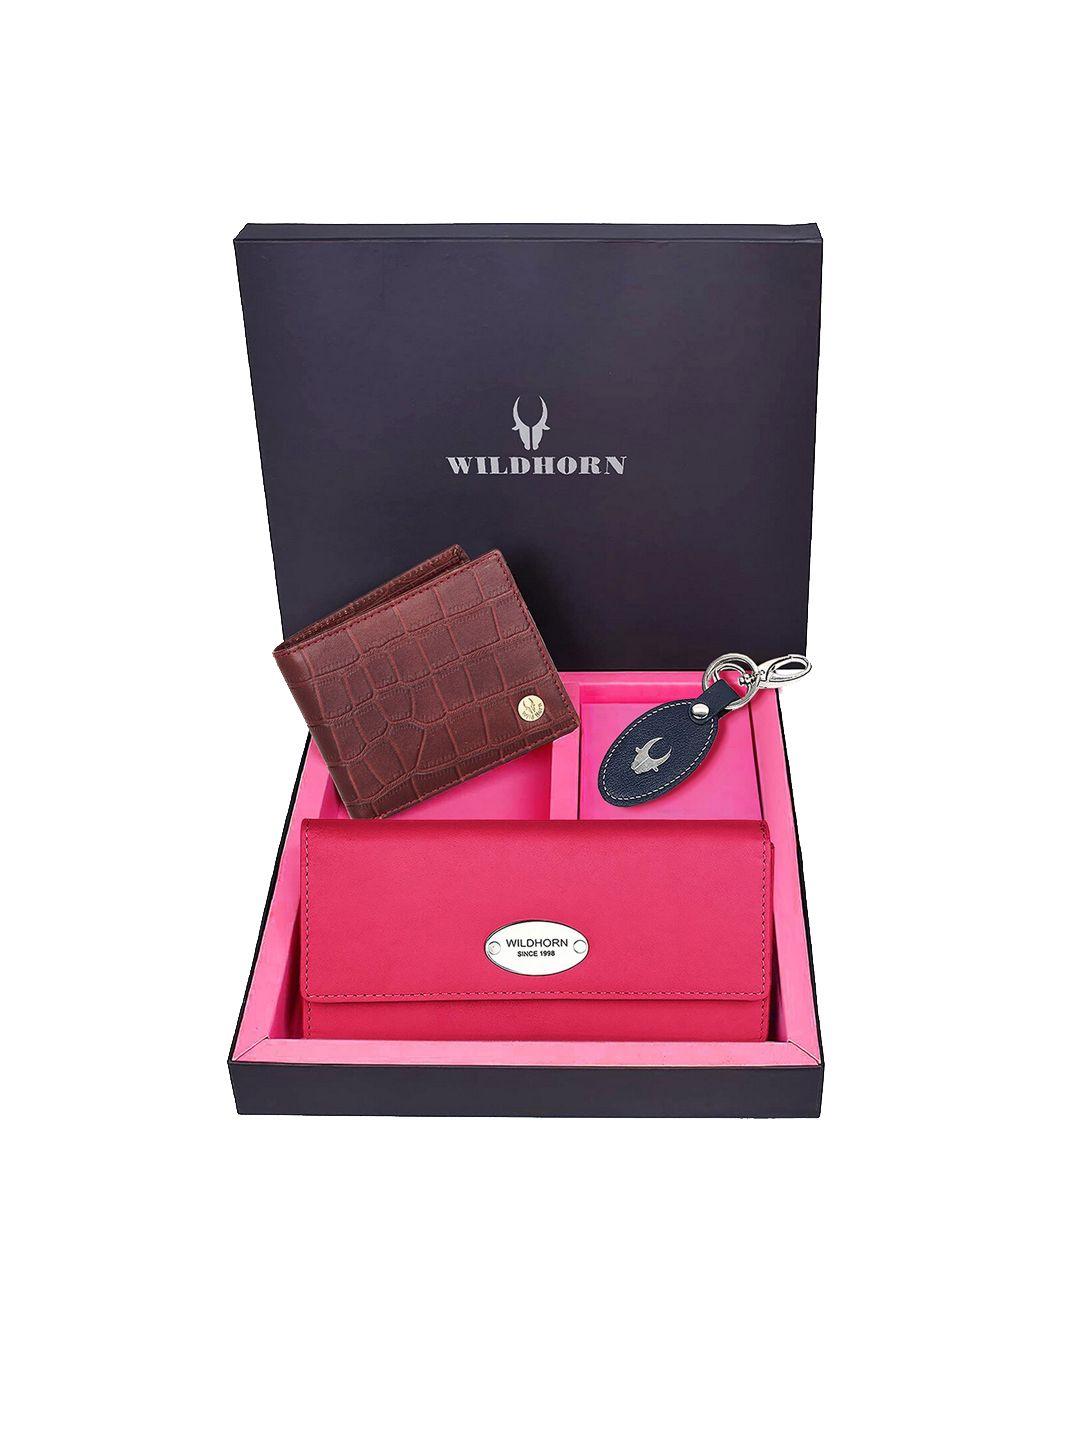 wildhorn unisex brown & pink solid premium leather accessory gift set